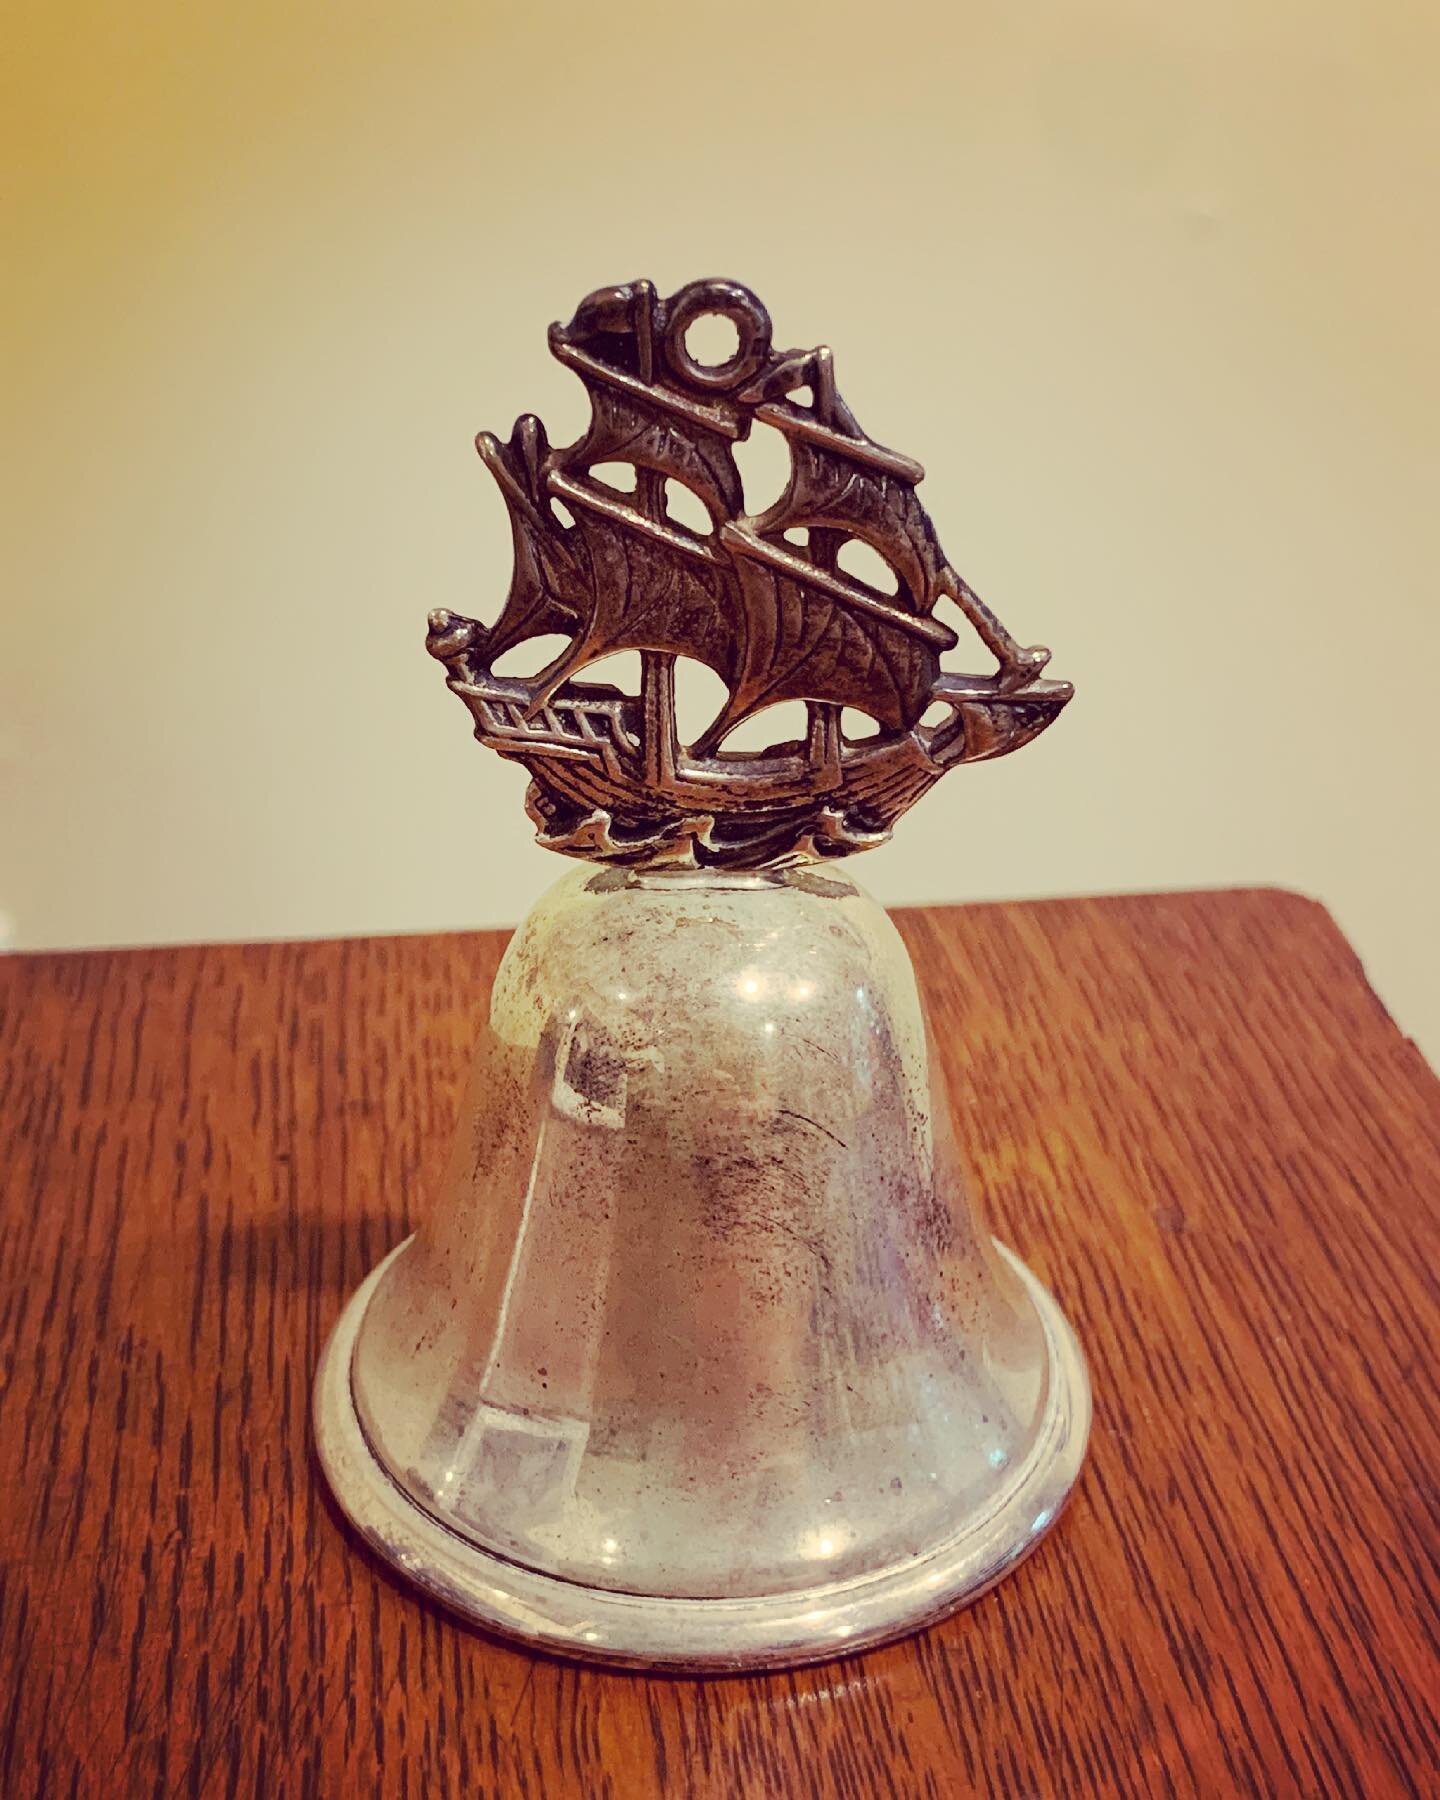 It was the silvery tinkling of a bell that woke her after midnight&hellip;

Who once rang this bell, and why?

Found in my grandmother&rsquo;s silver collection. 

#thestorycabinet #thestorytellerya #writingprompts #writewithme #oldstuffiscool #antiq